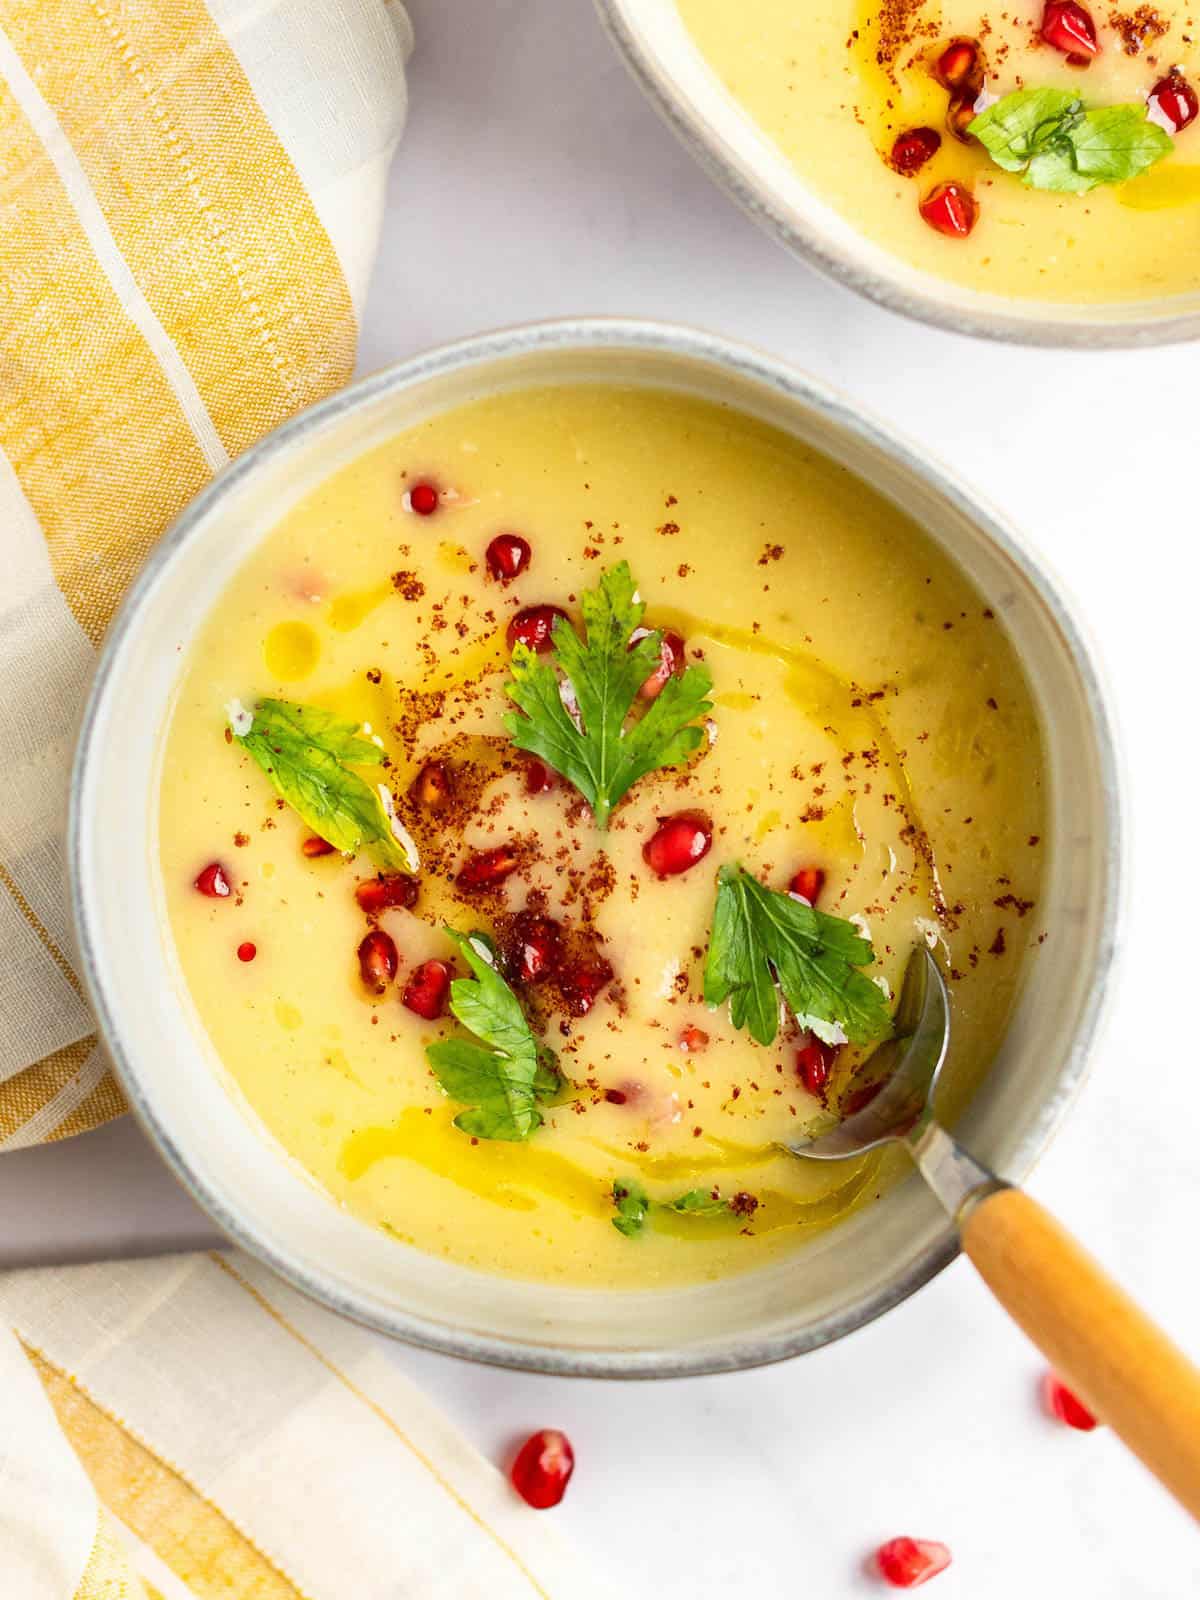 Parsnip and apple soup topped with pomegranate seeds in a bowl.